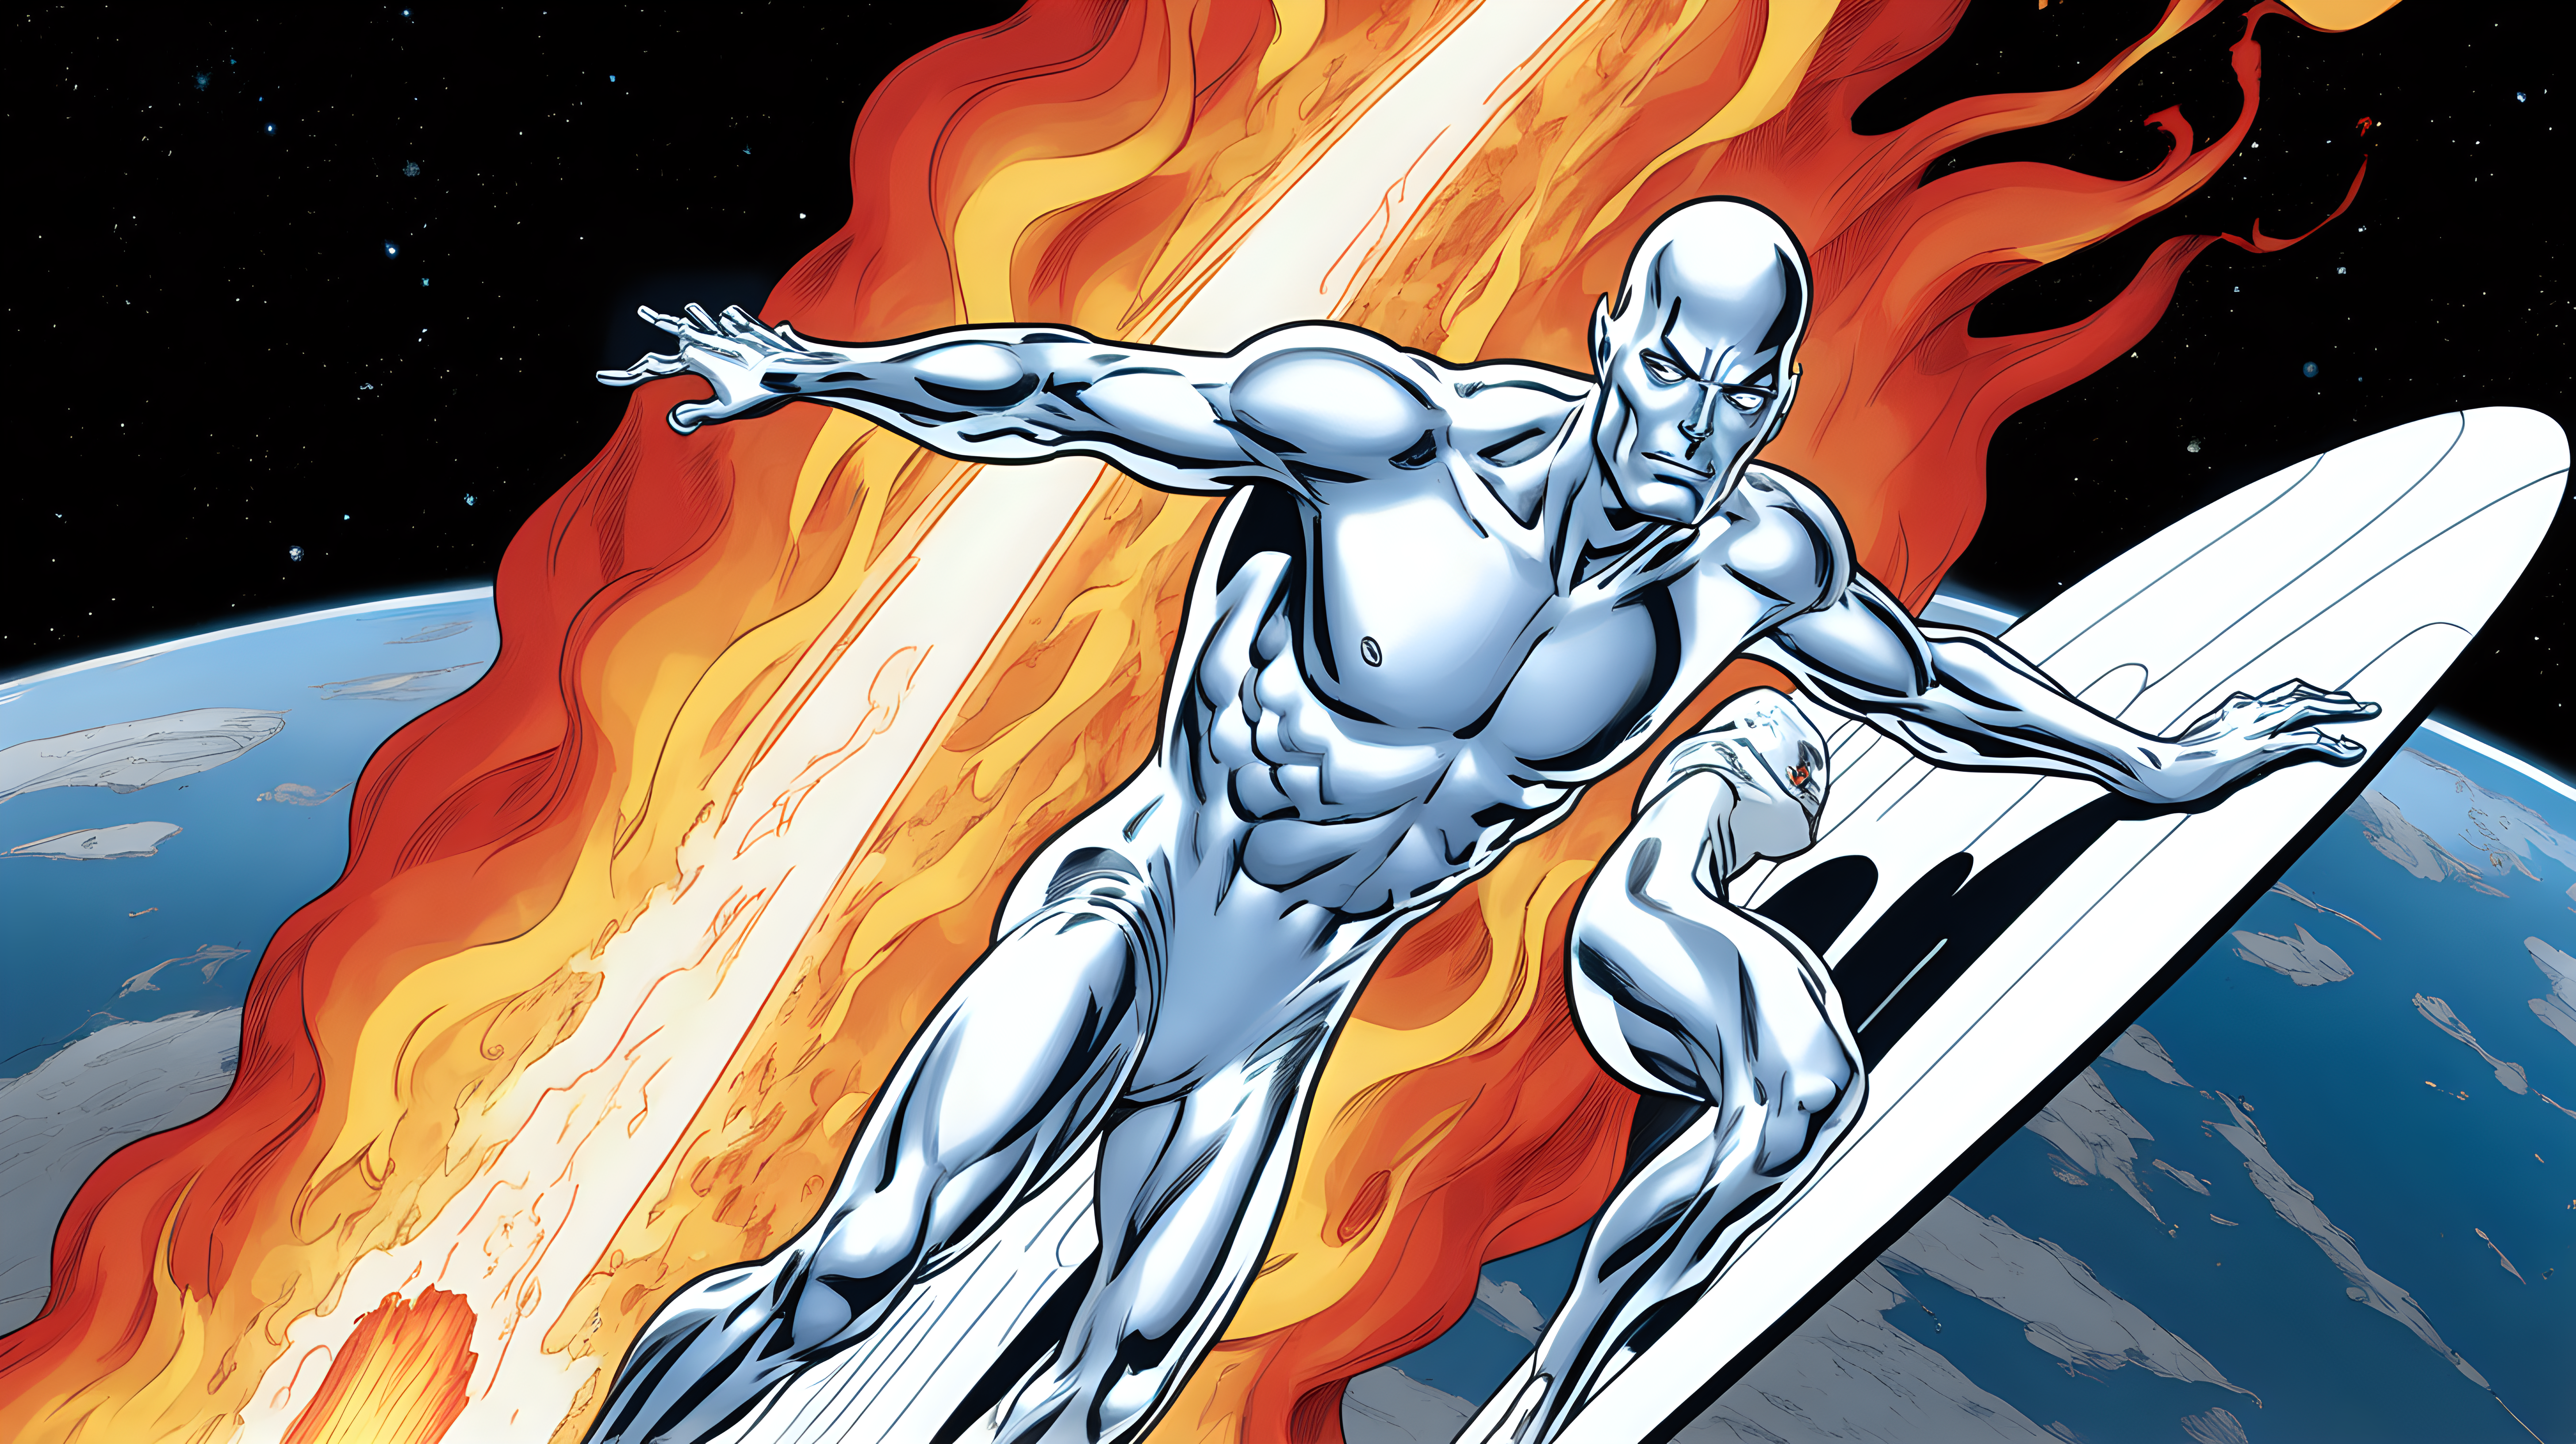 The Silver Surfer reigning fire down on earth